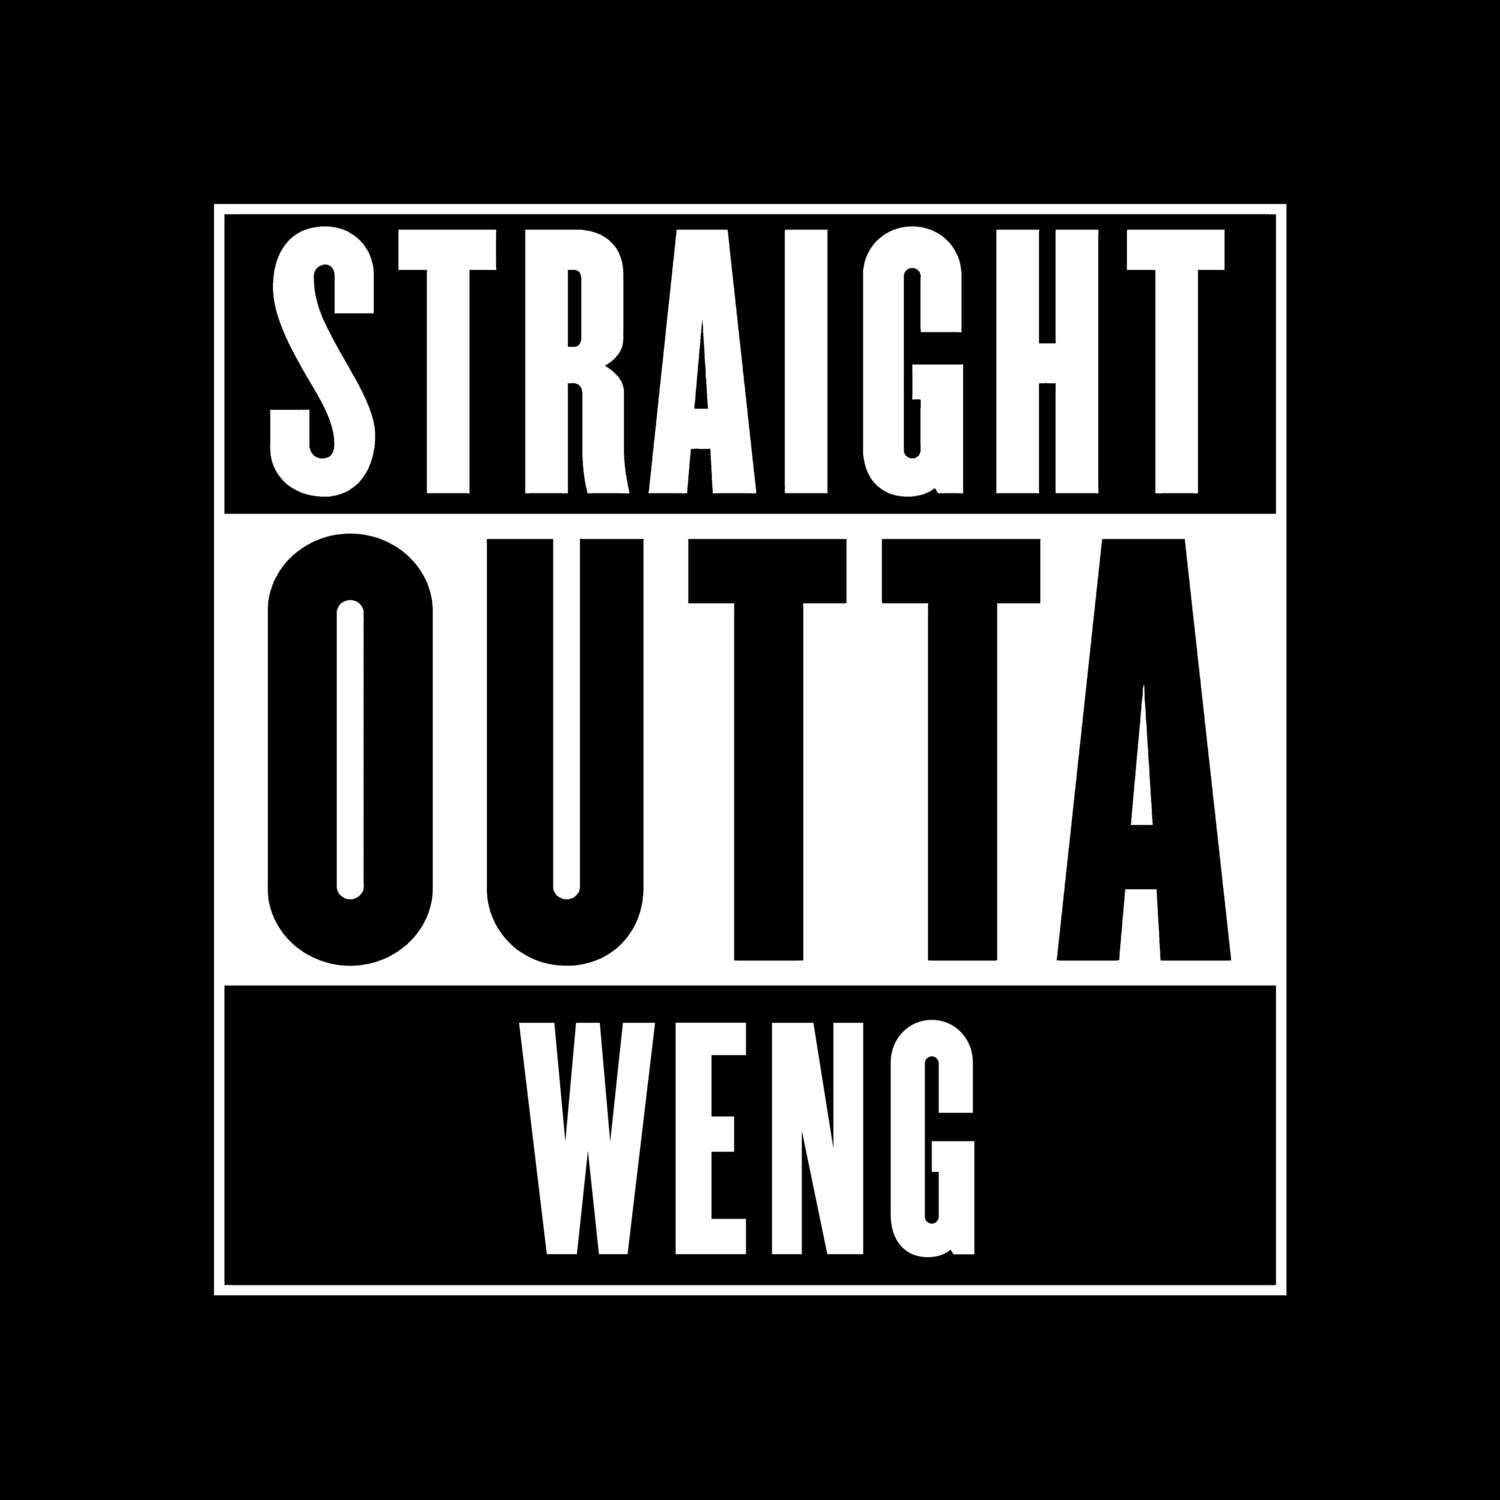 Weng T-Shirt »Straight Outta«